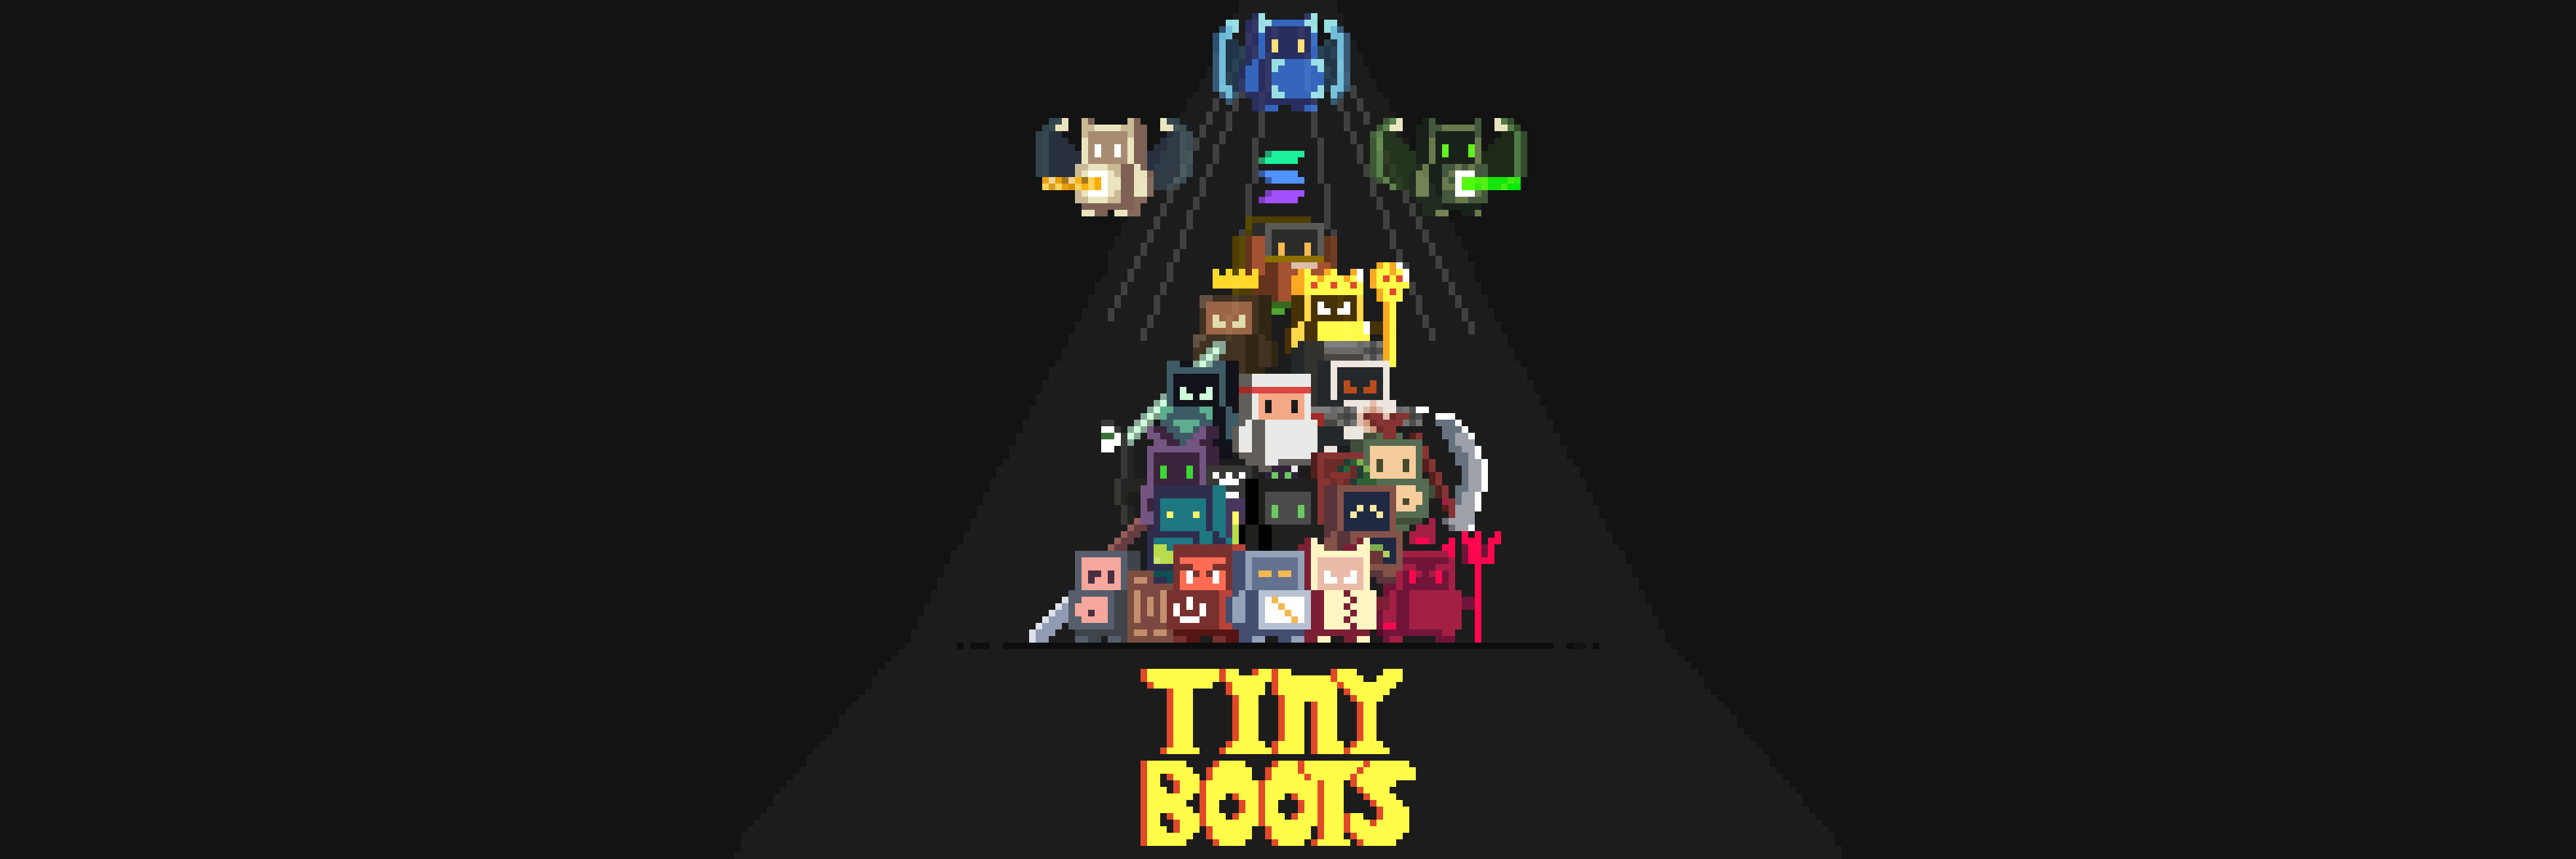 Tiny Boots banner